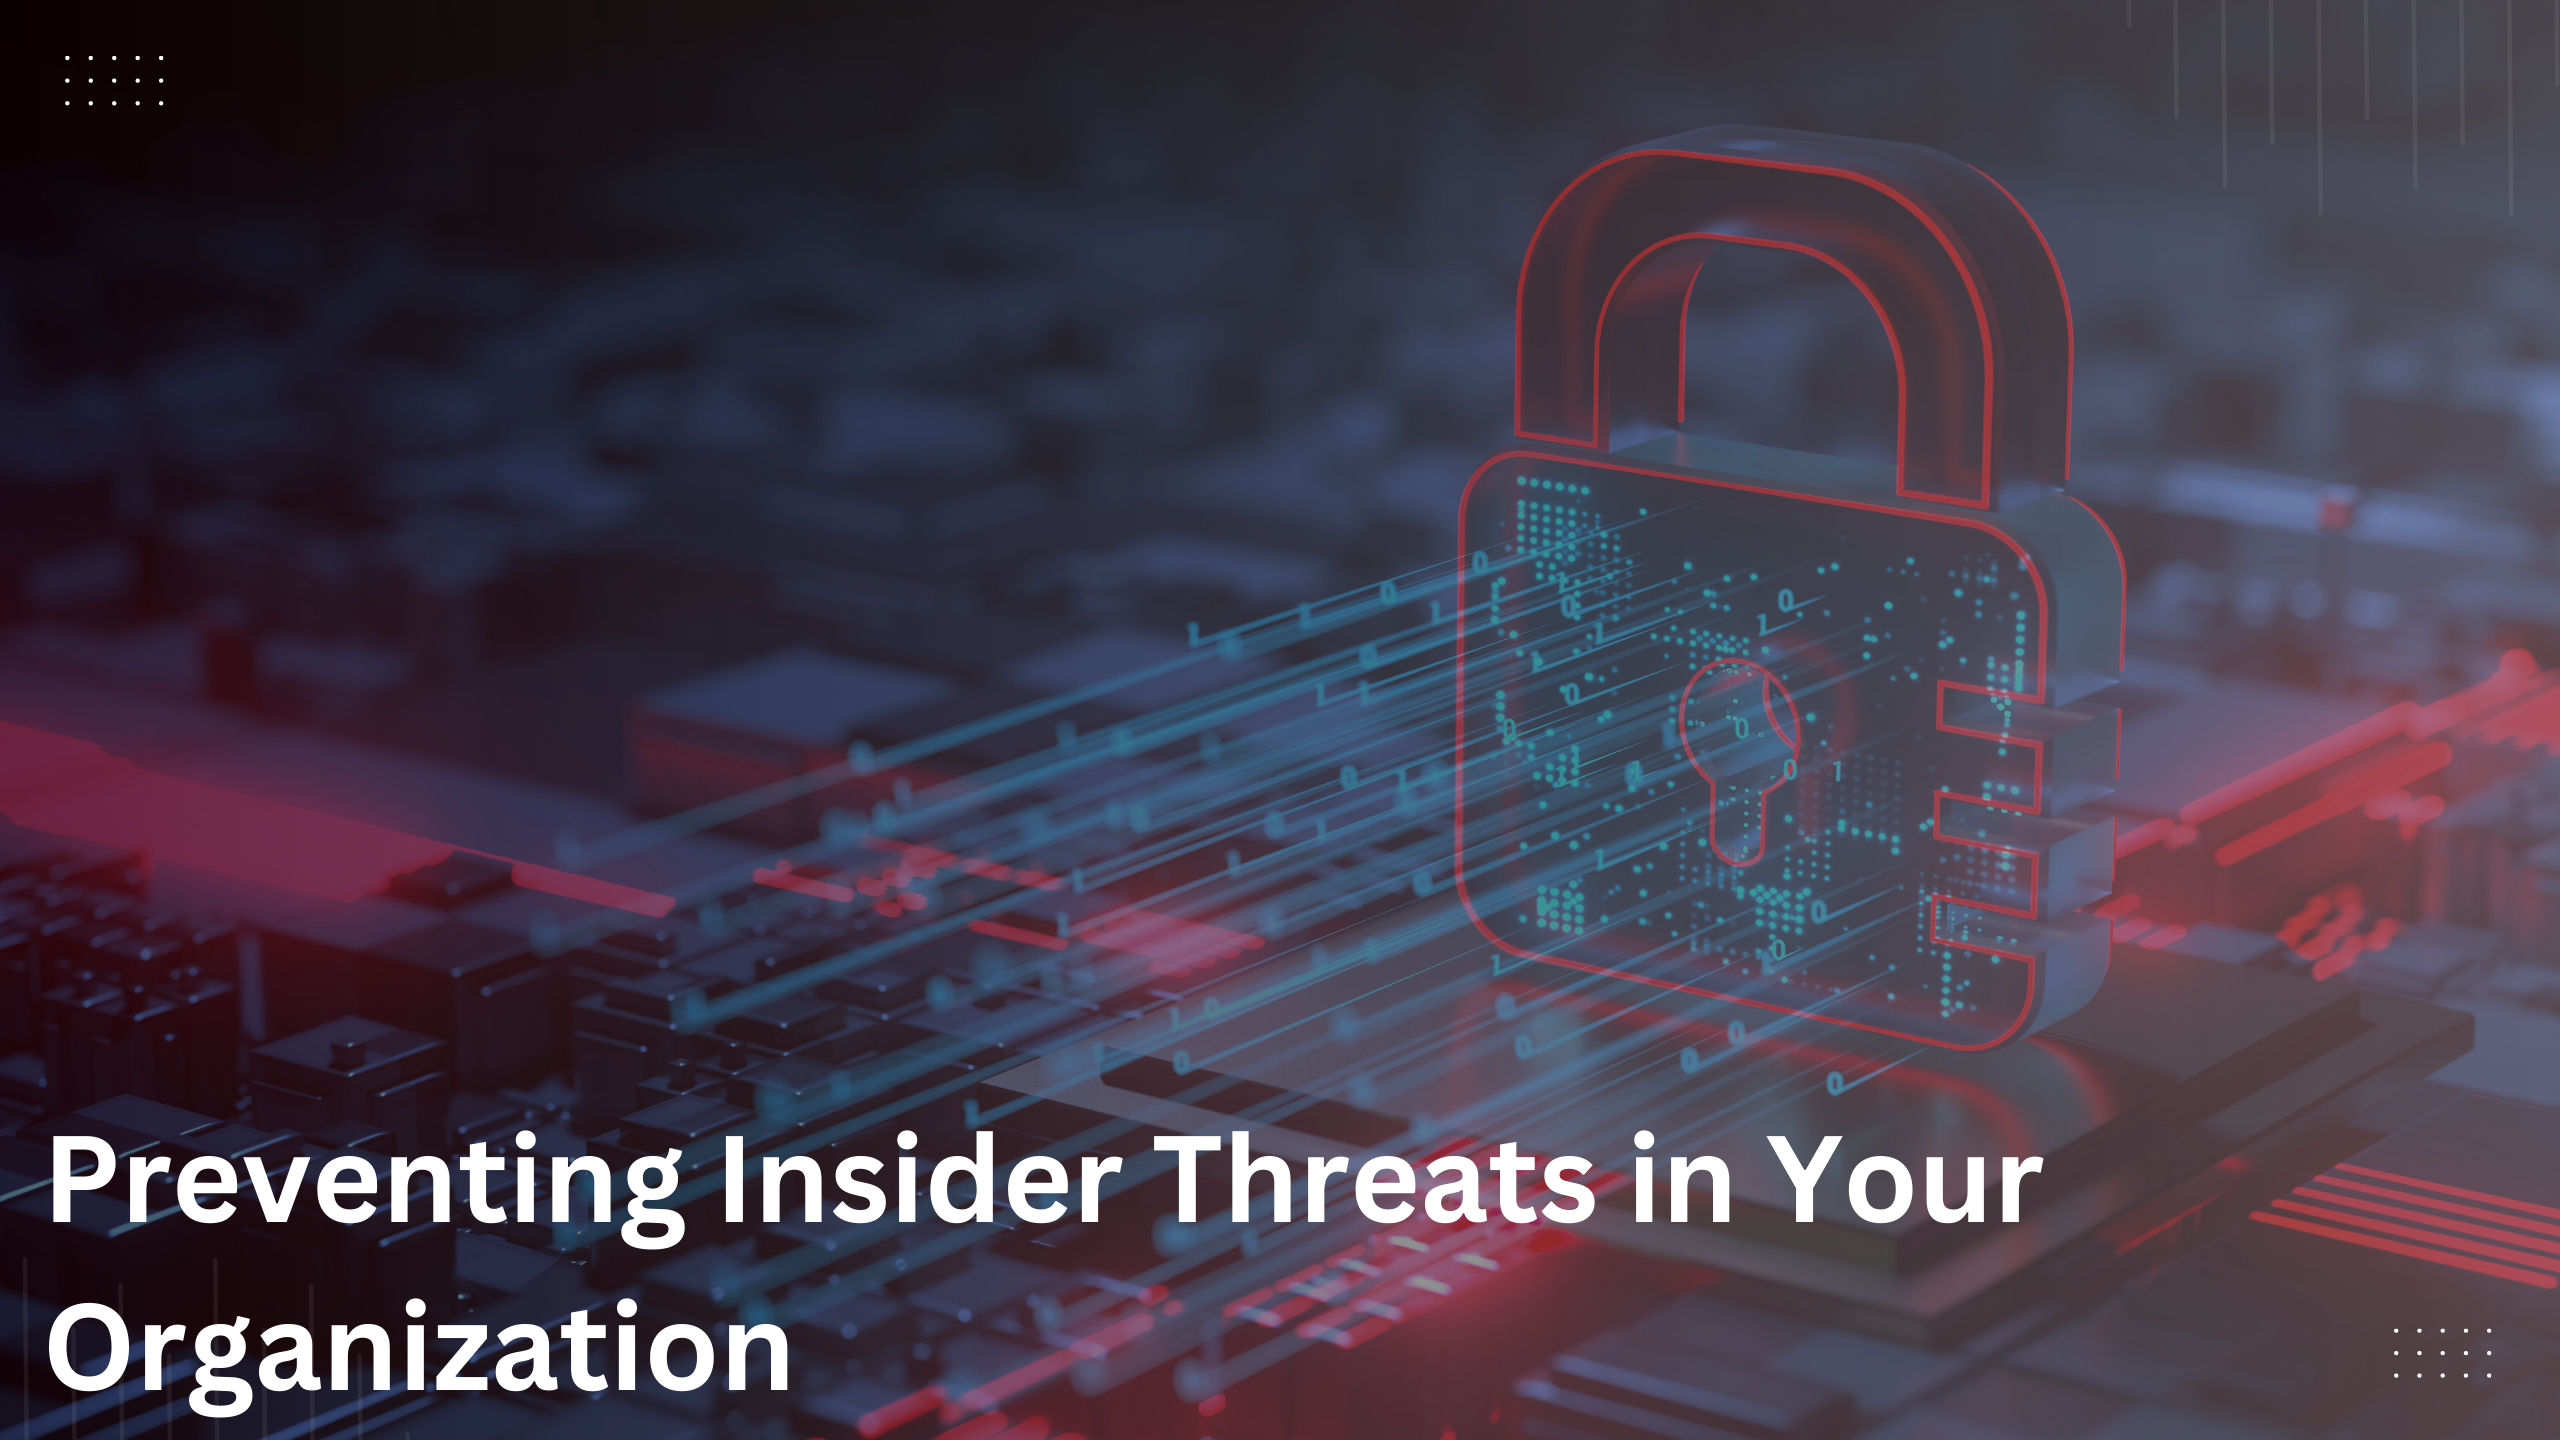 Preventing Insider Threats in Your Organization